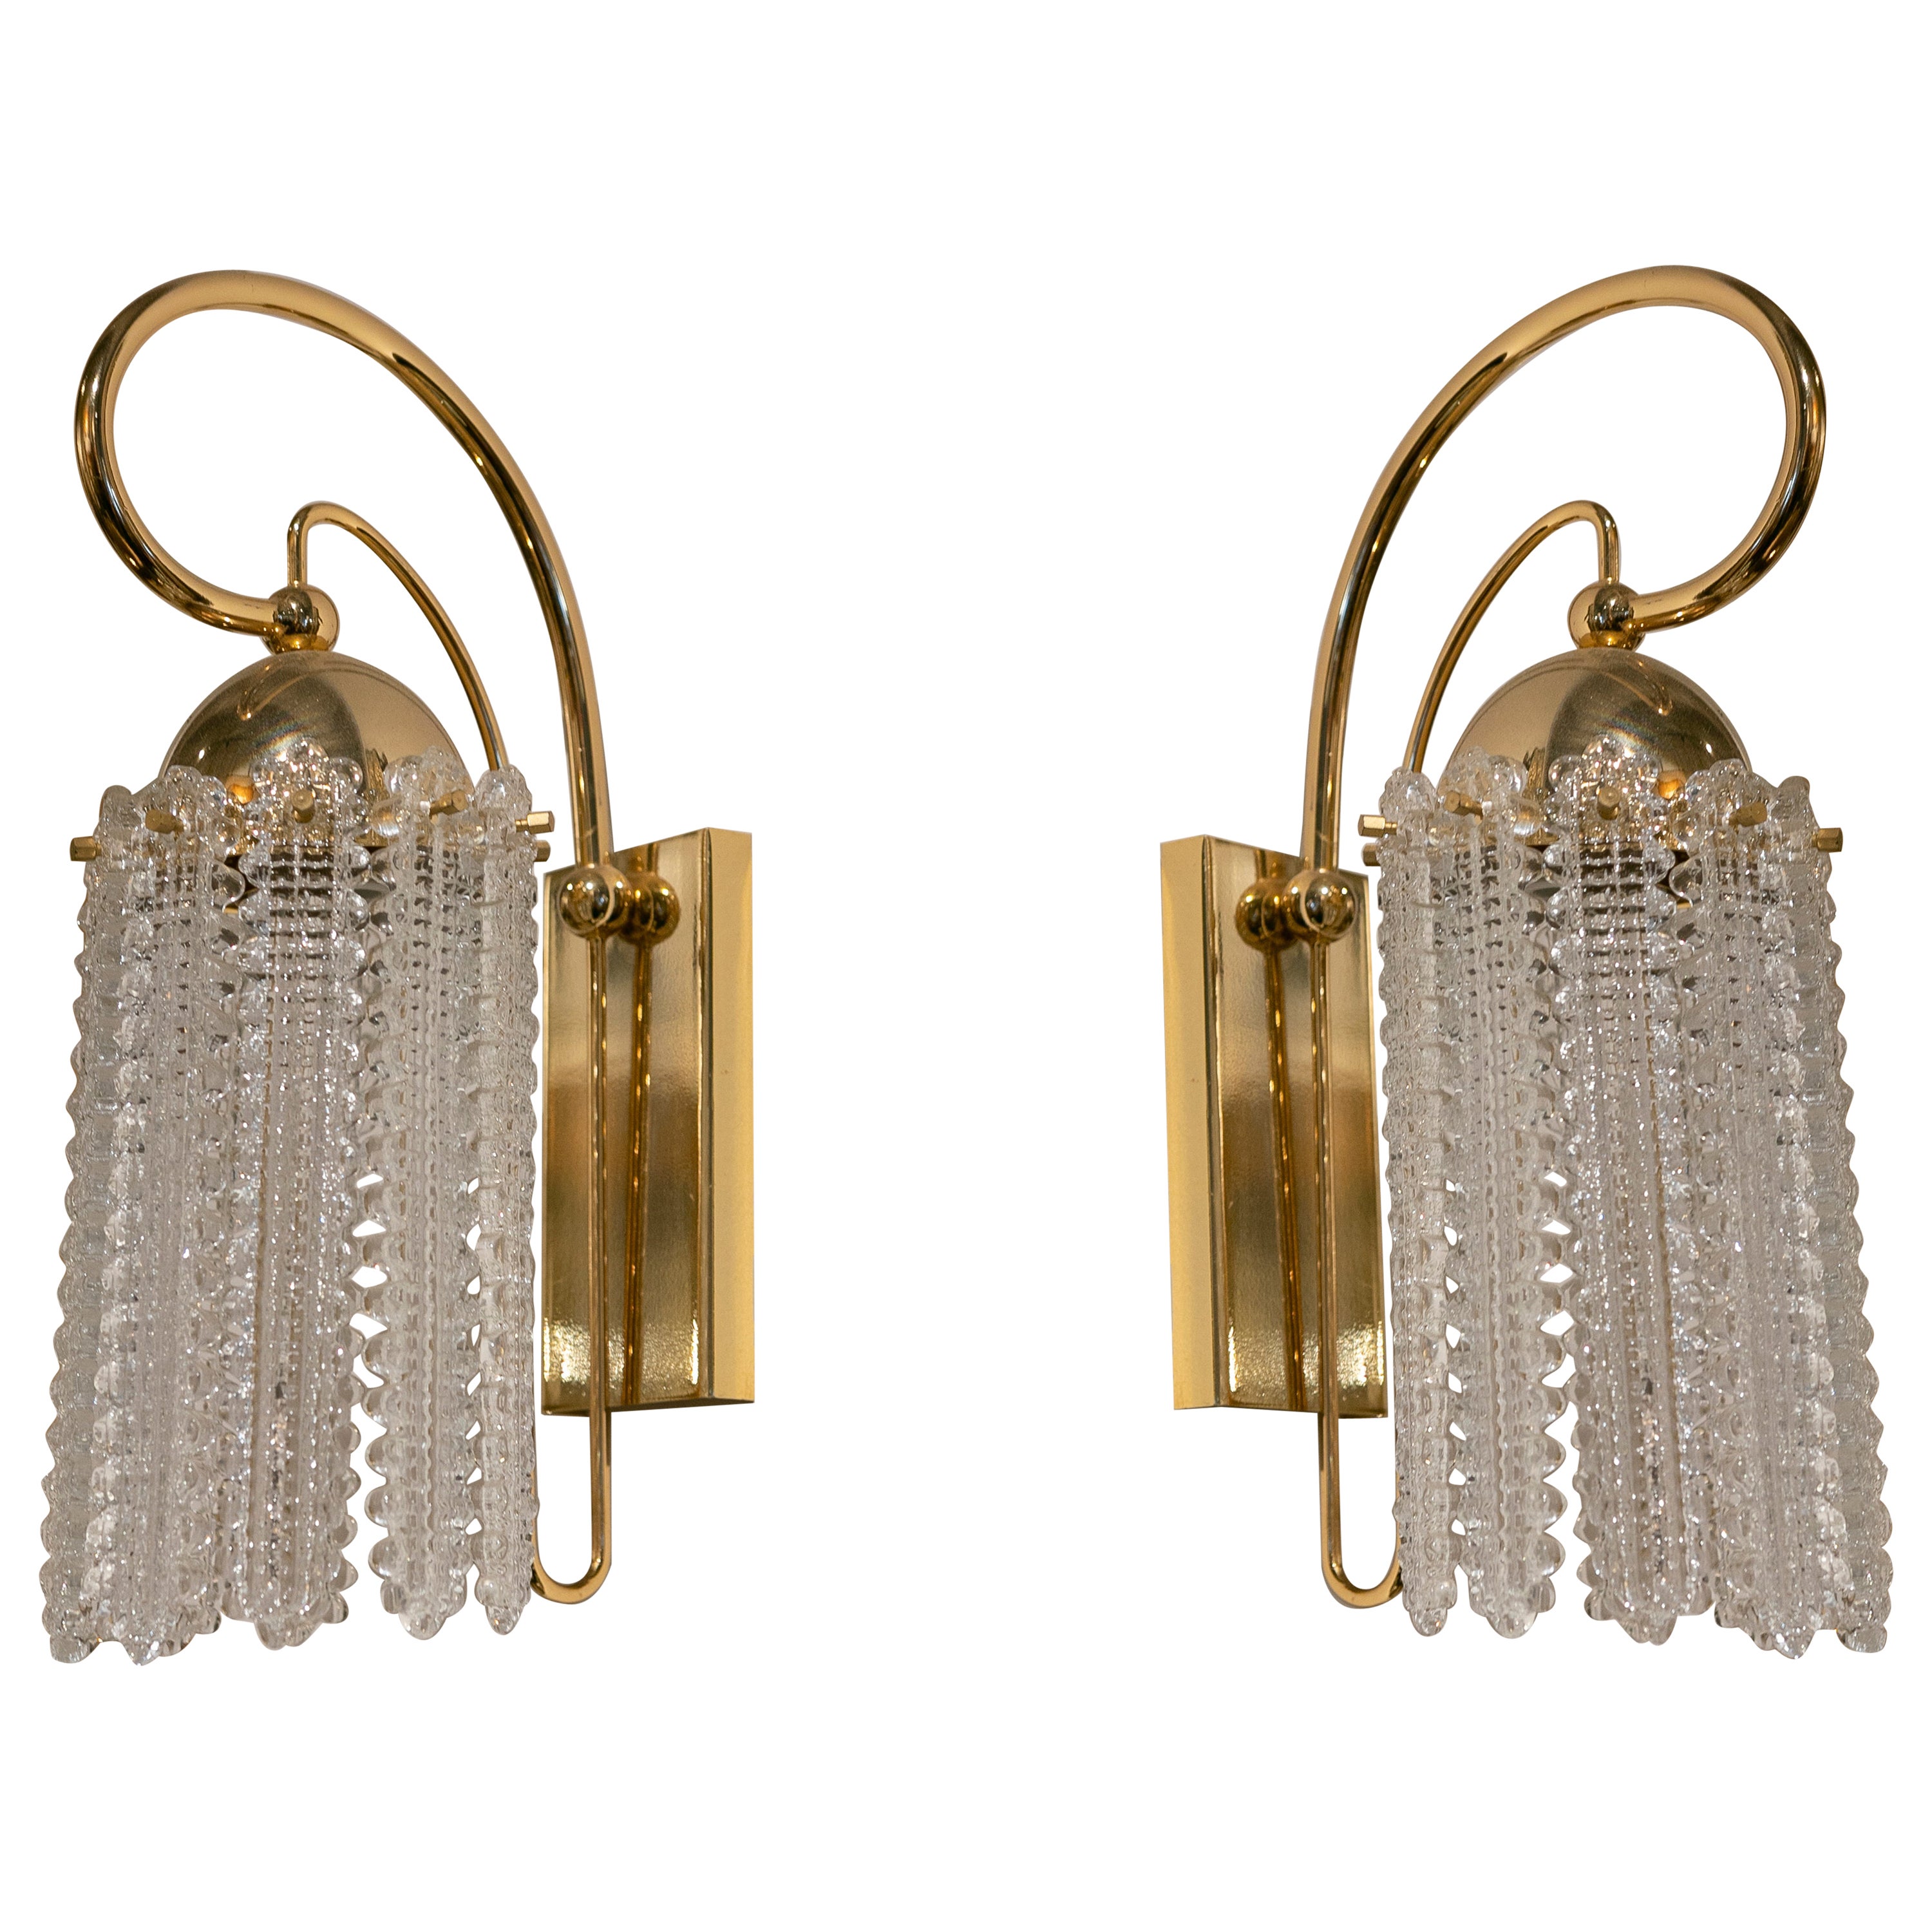 1970s Spanish Pair of Sconces in Gilded Metal with Crystals